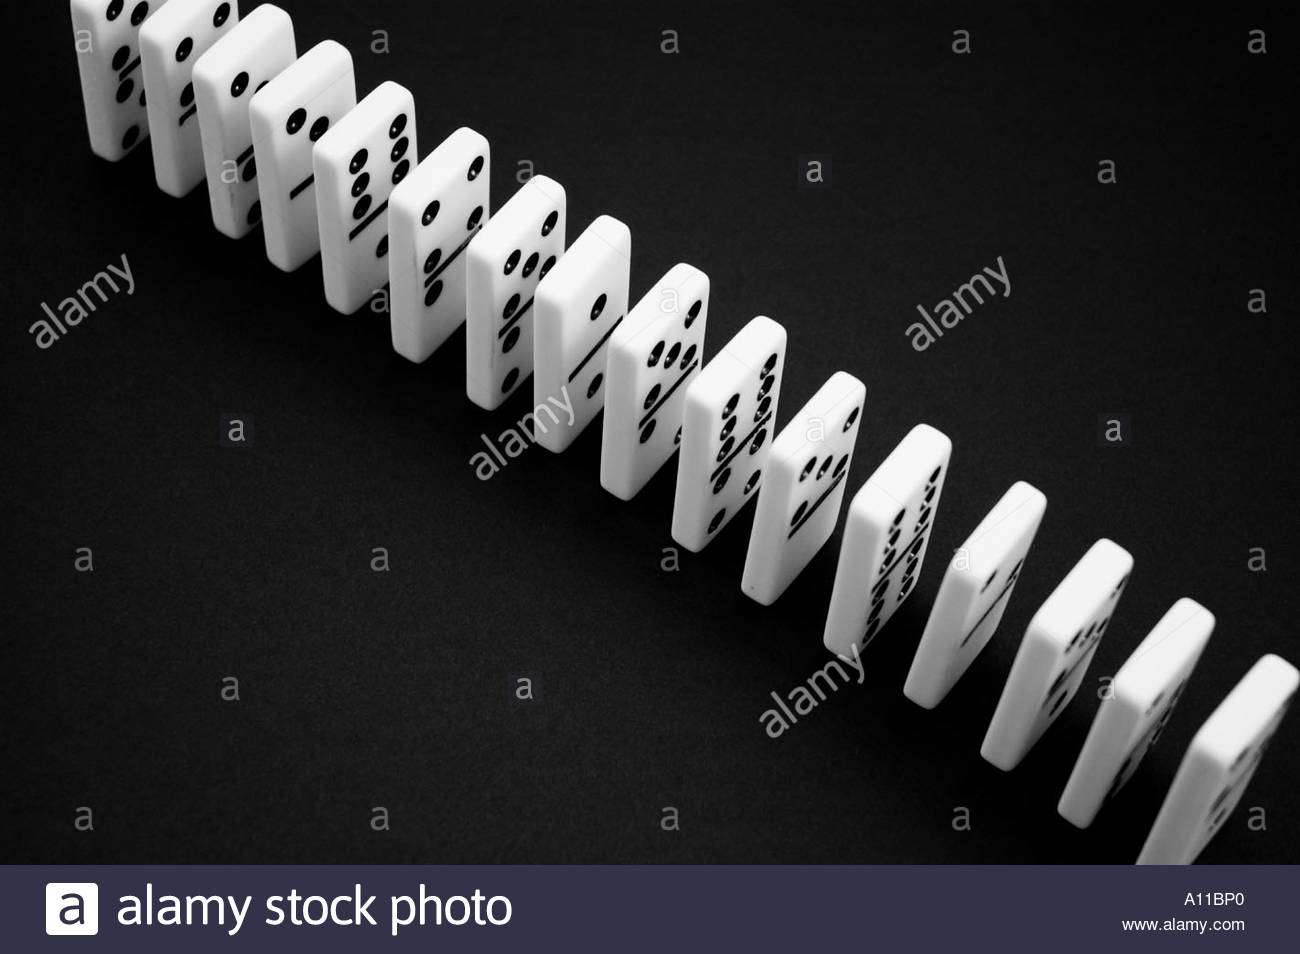 Dominos in a row on a black background Stock Photo 5777823